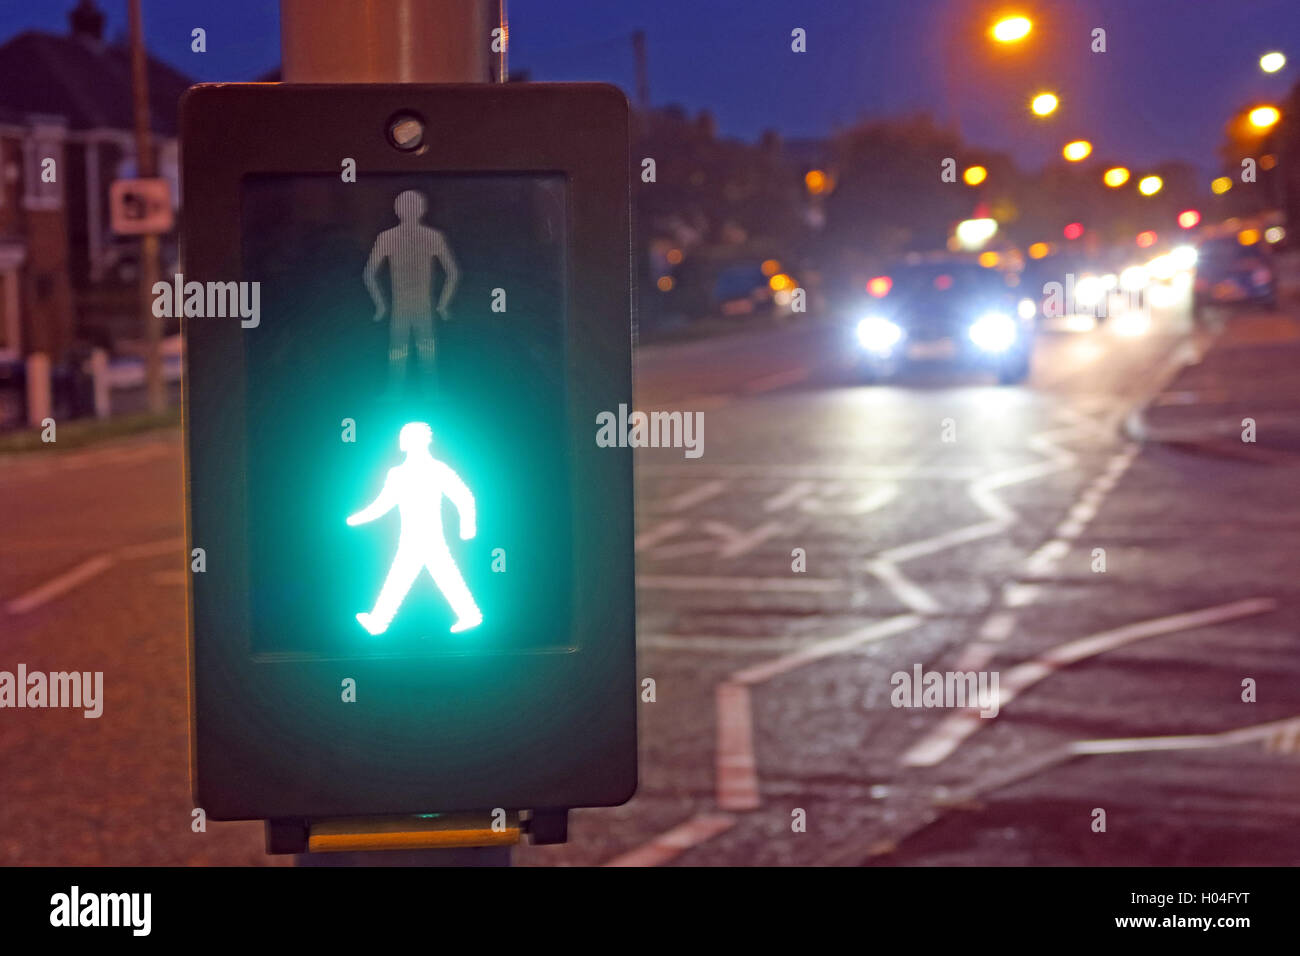 Pelican Crossing with green man, safe to cross, England, UK Stock Photo